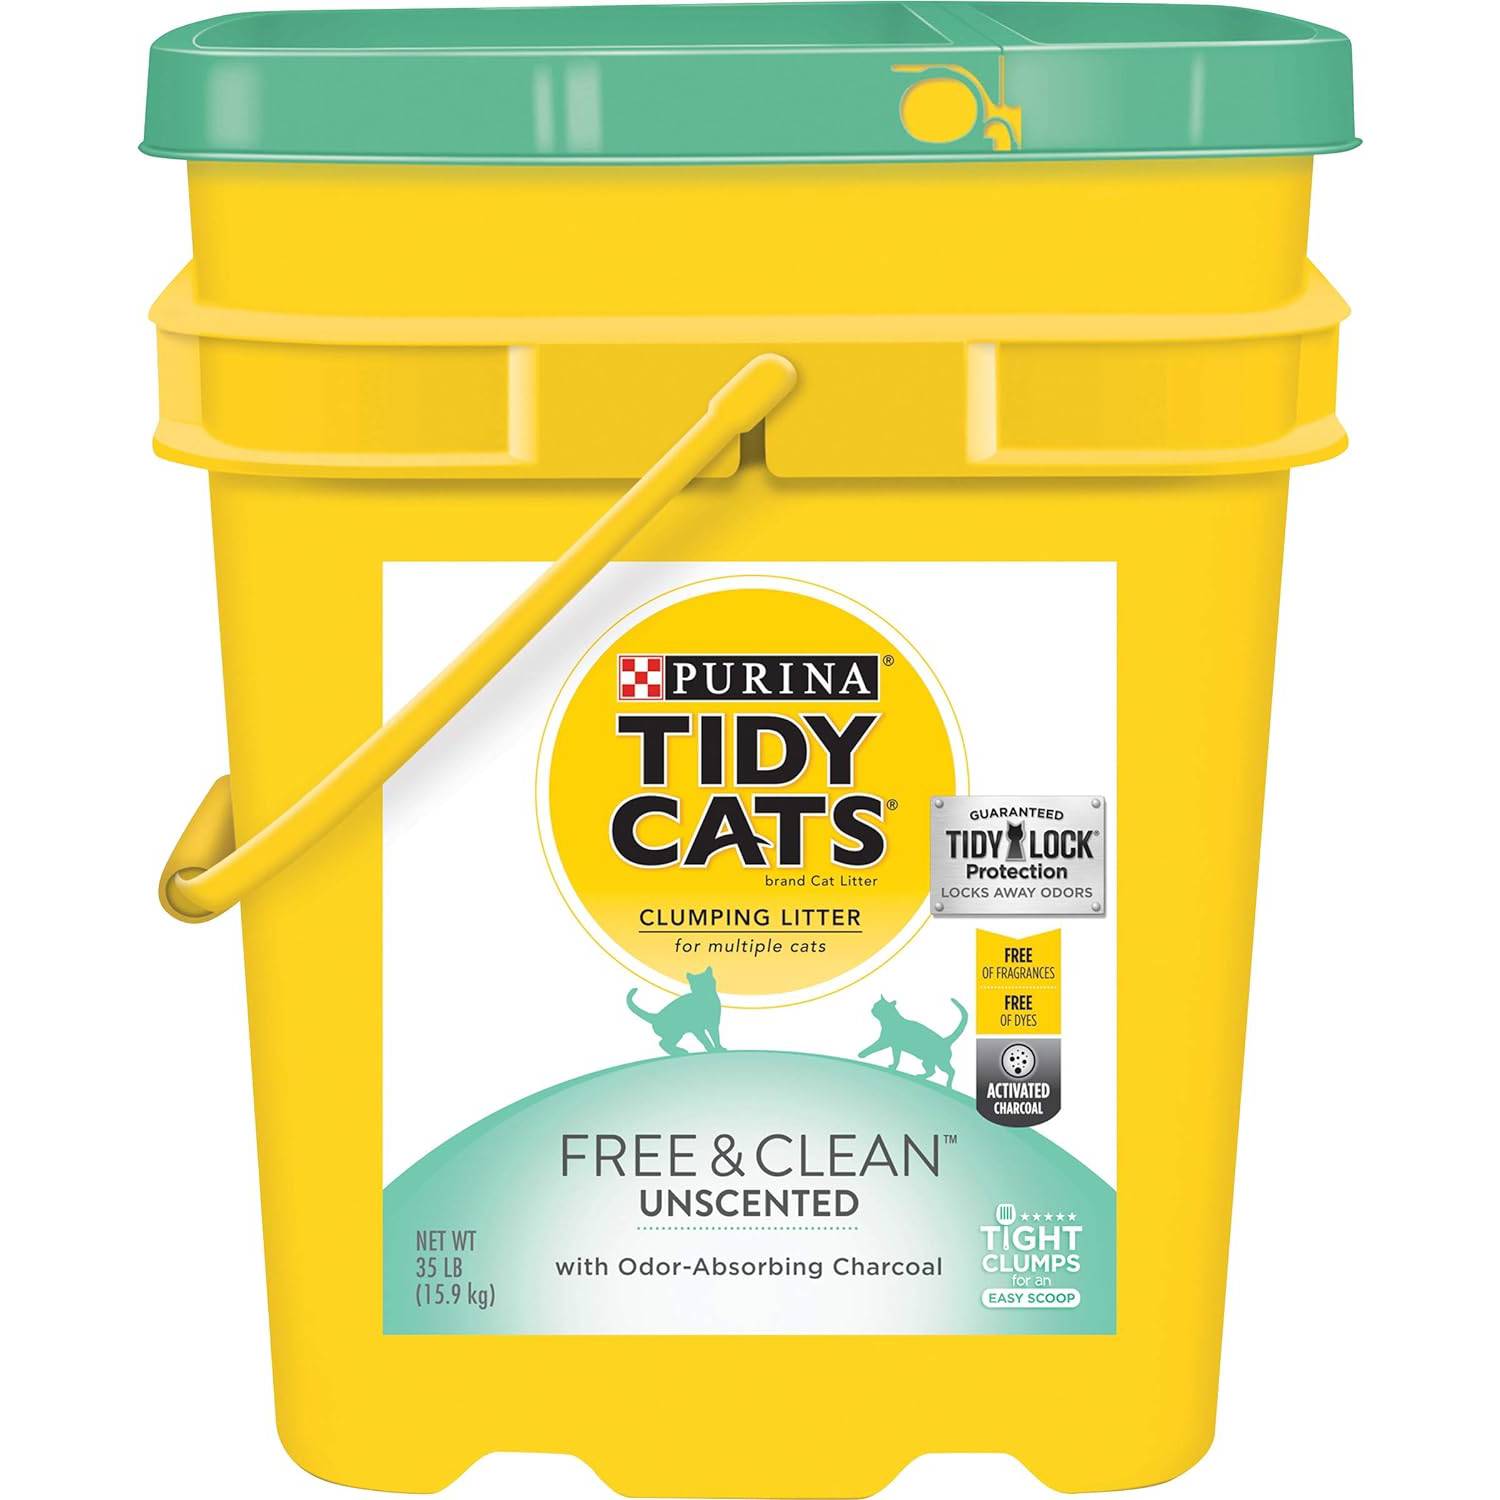 Tidy Cats Free & Clean Unscented Clumping Clay